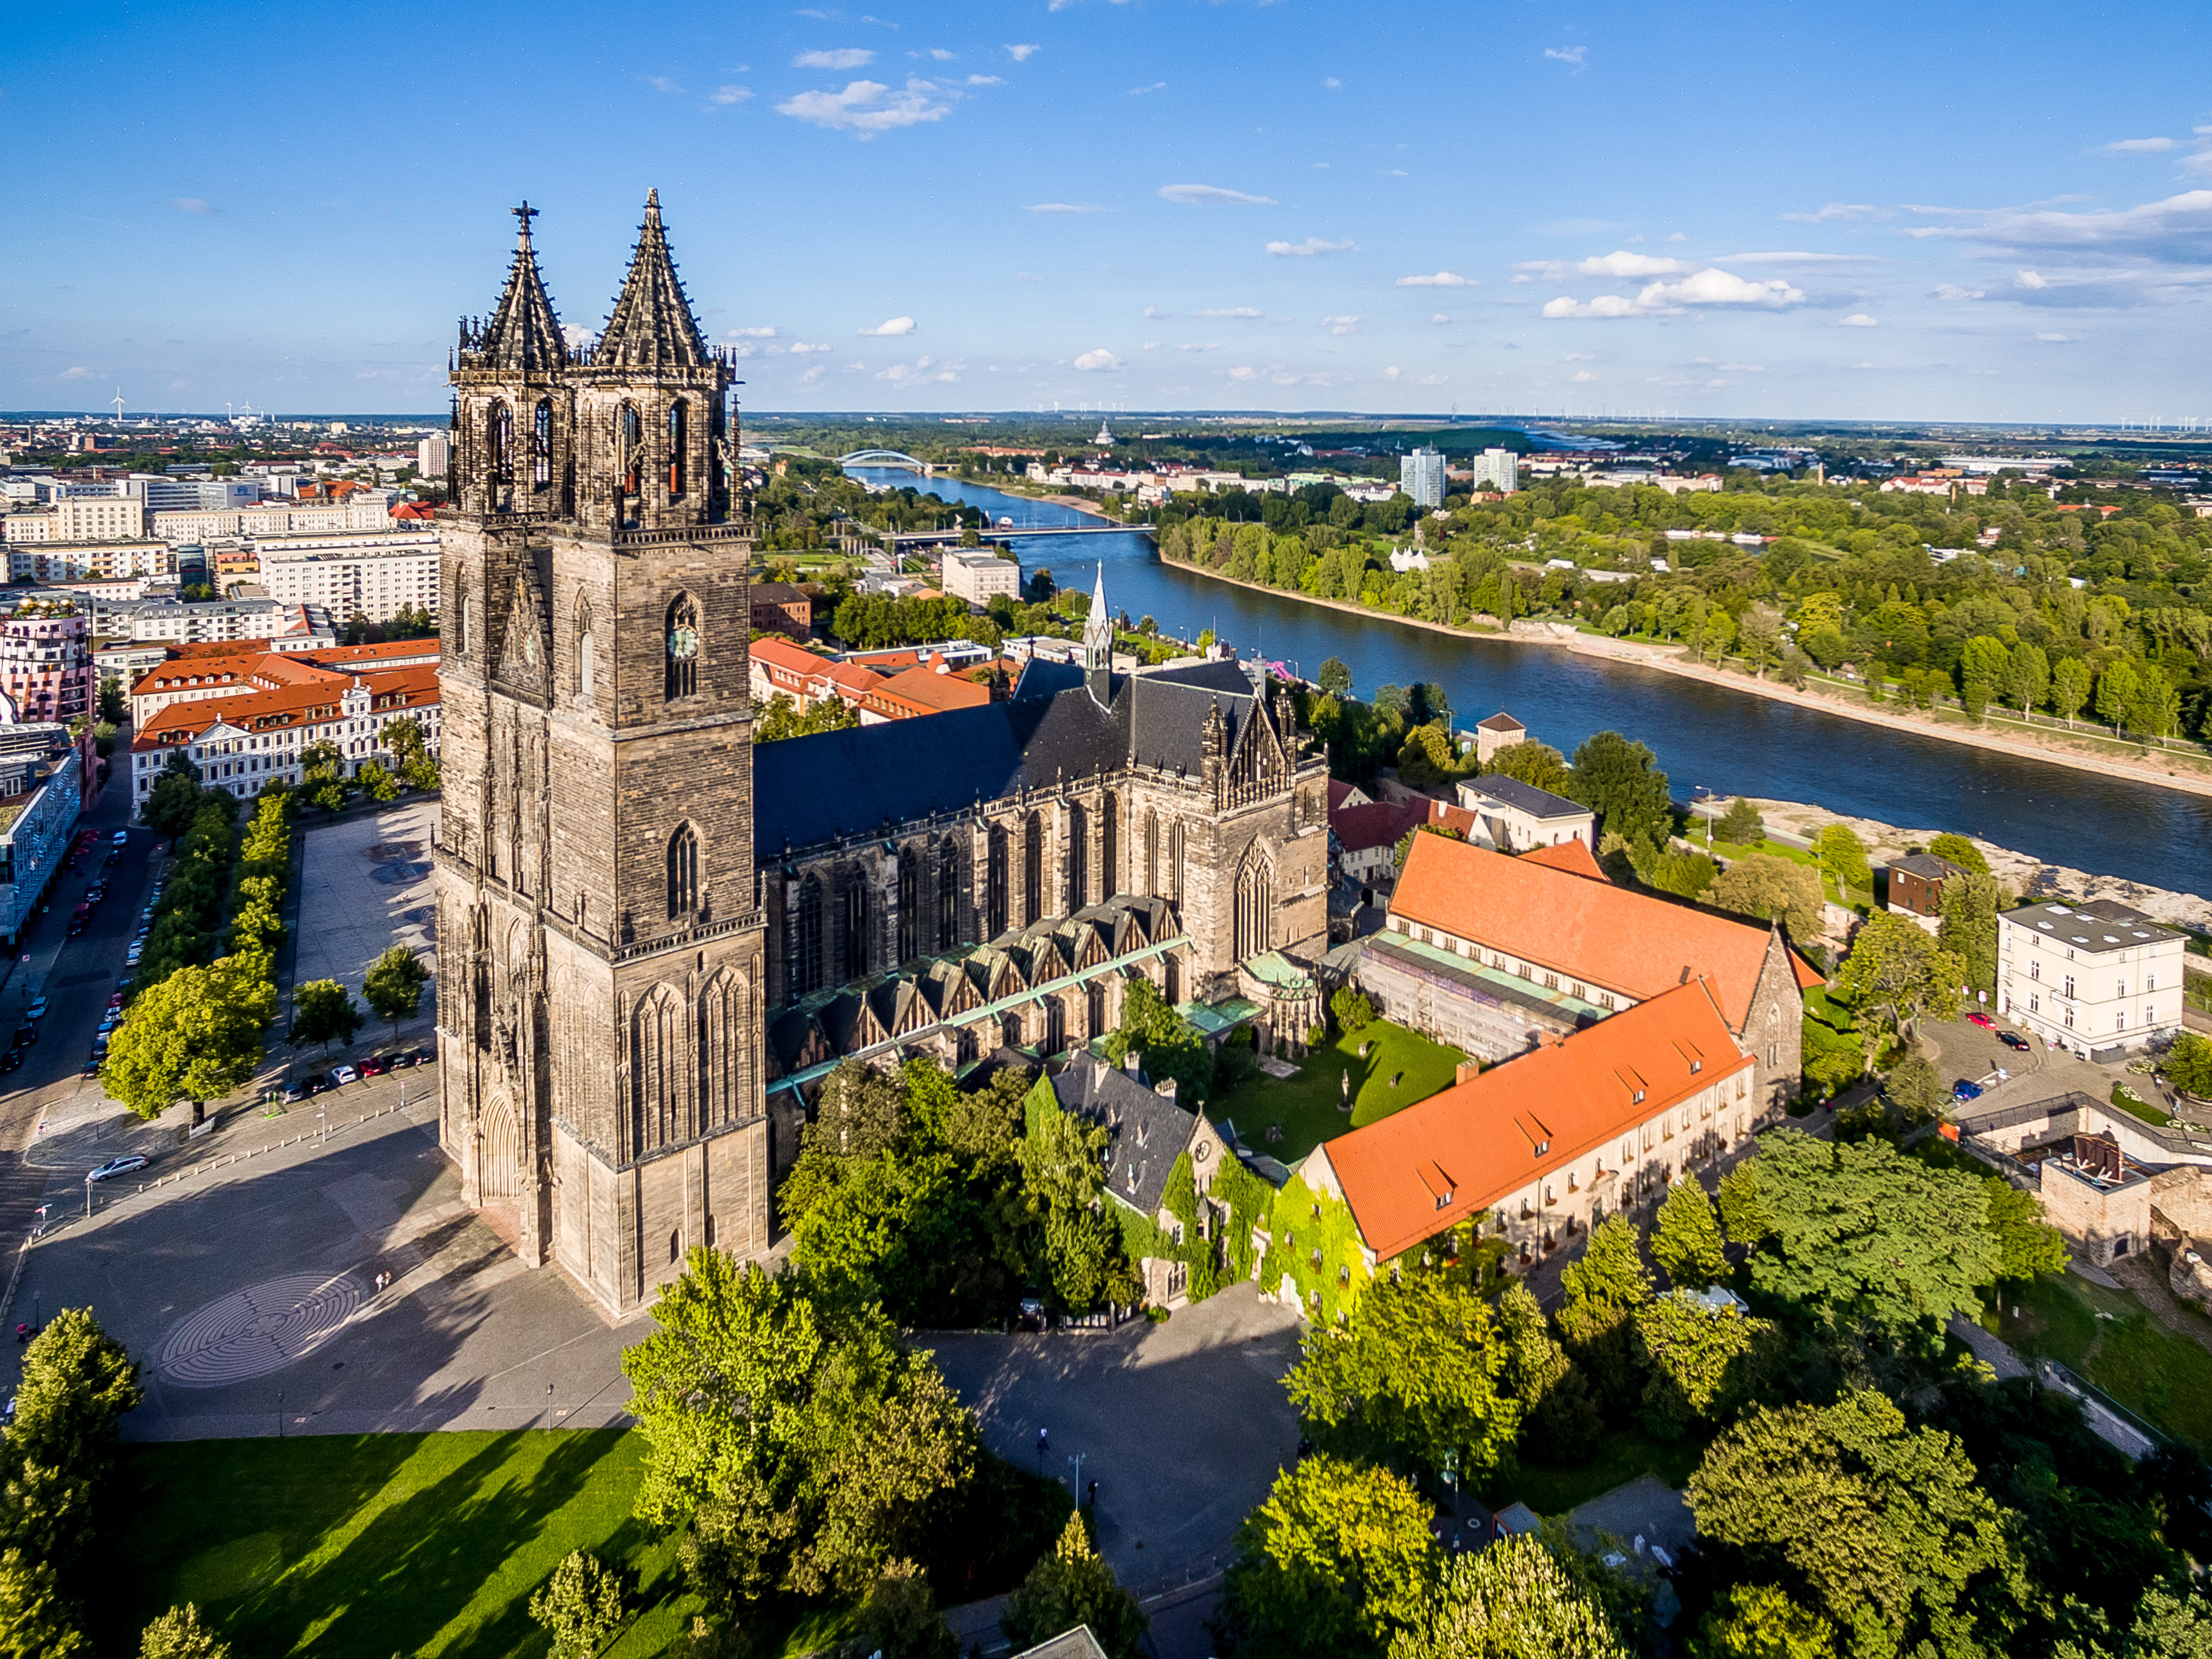 magdeburg tourist places